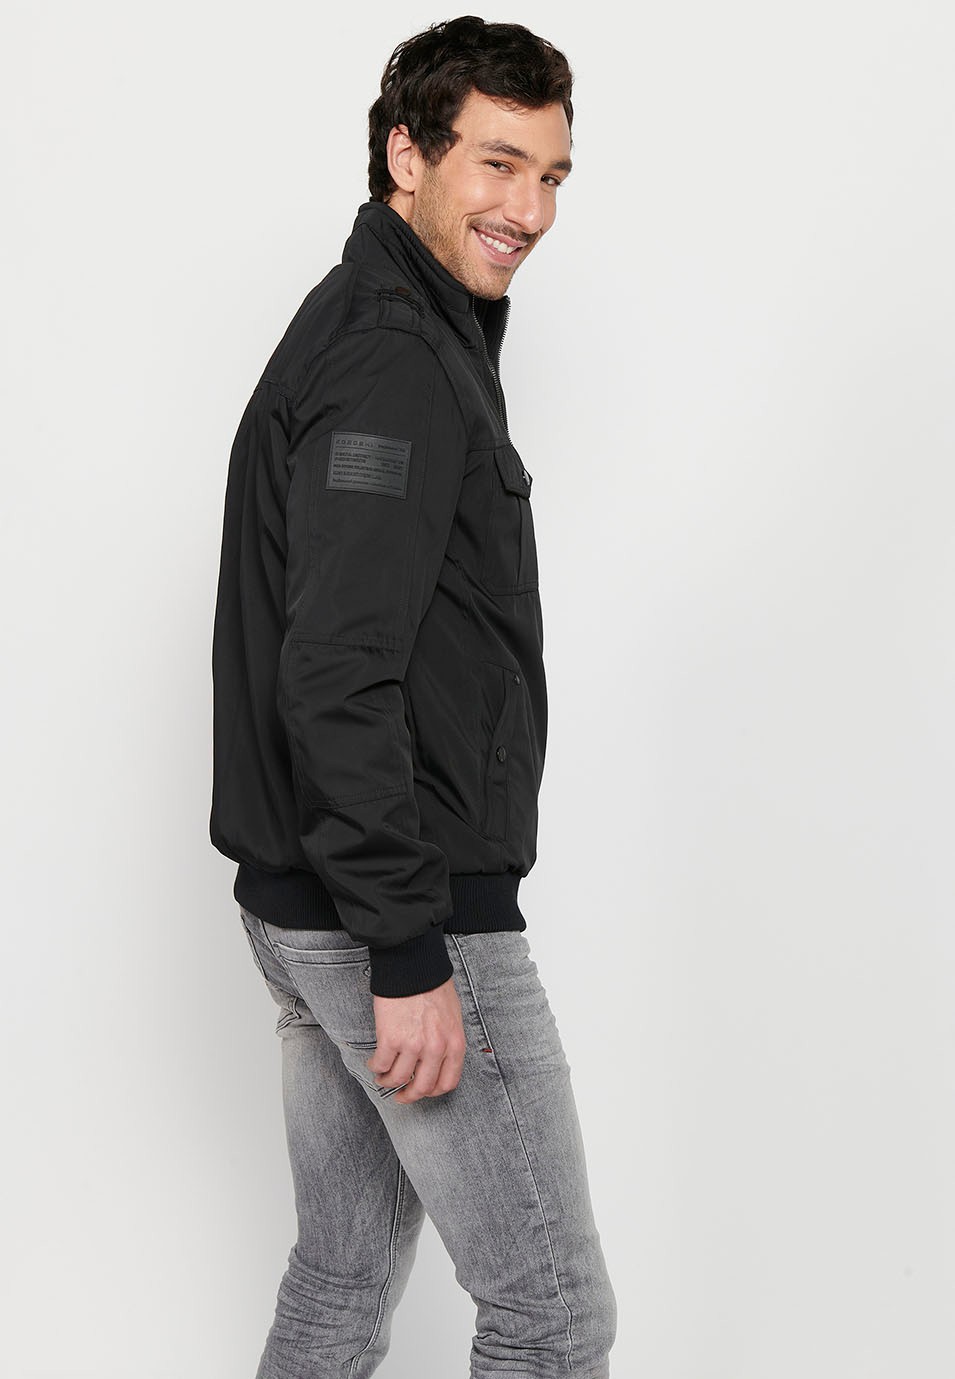 Black Long Sleeve Jacket with Round Neck and Front Zipper Closure with Flap Pockets for Men 2